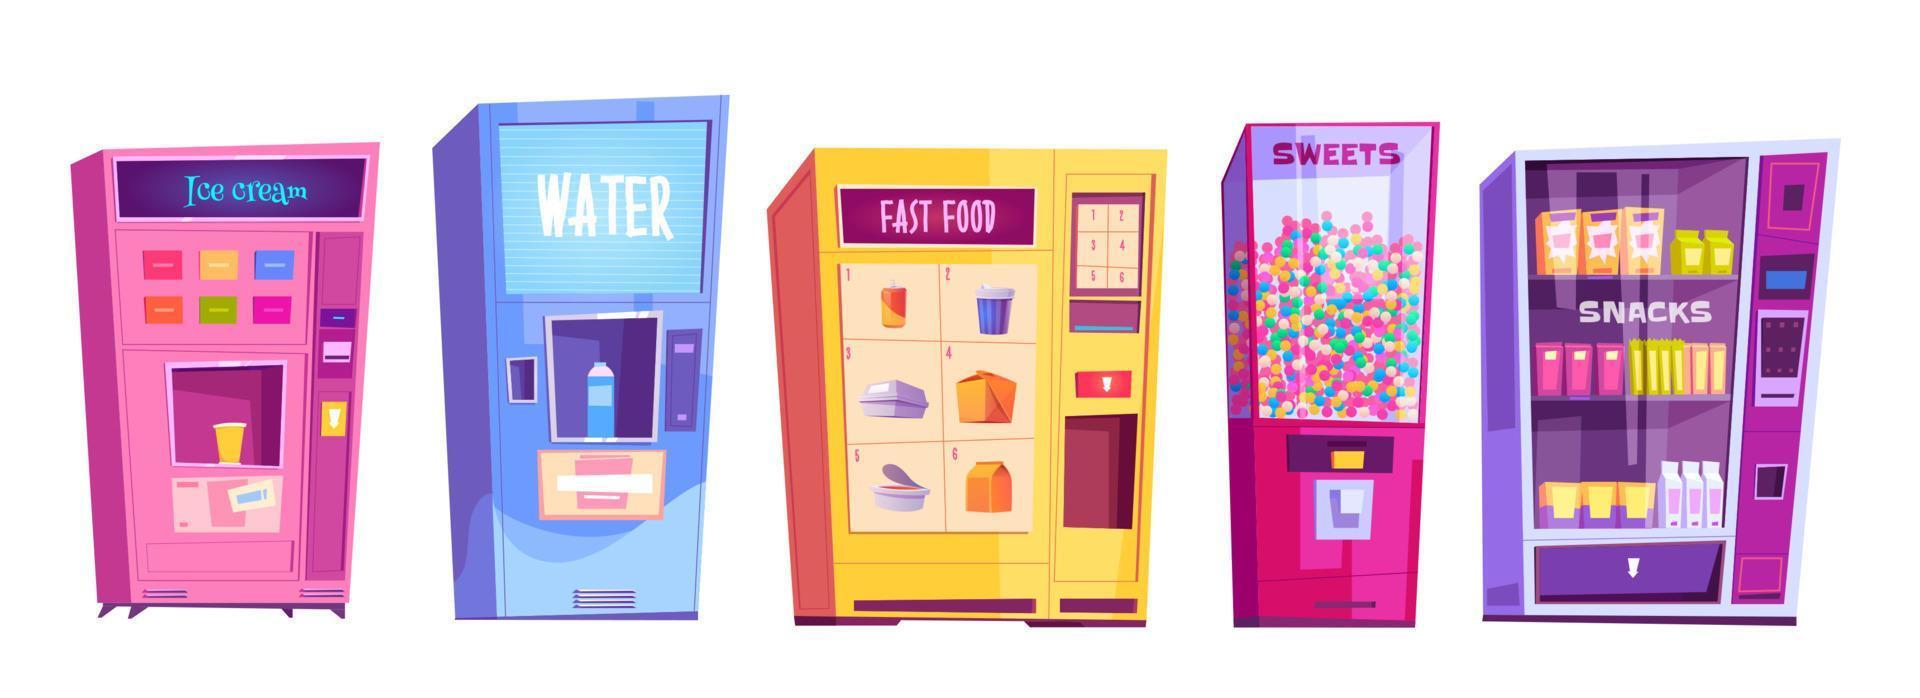 Vending machines with snacks, fast food, water vector